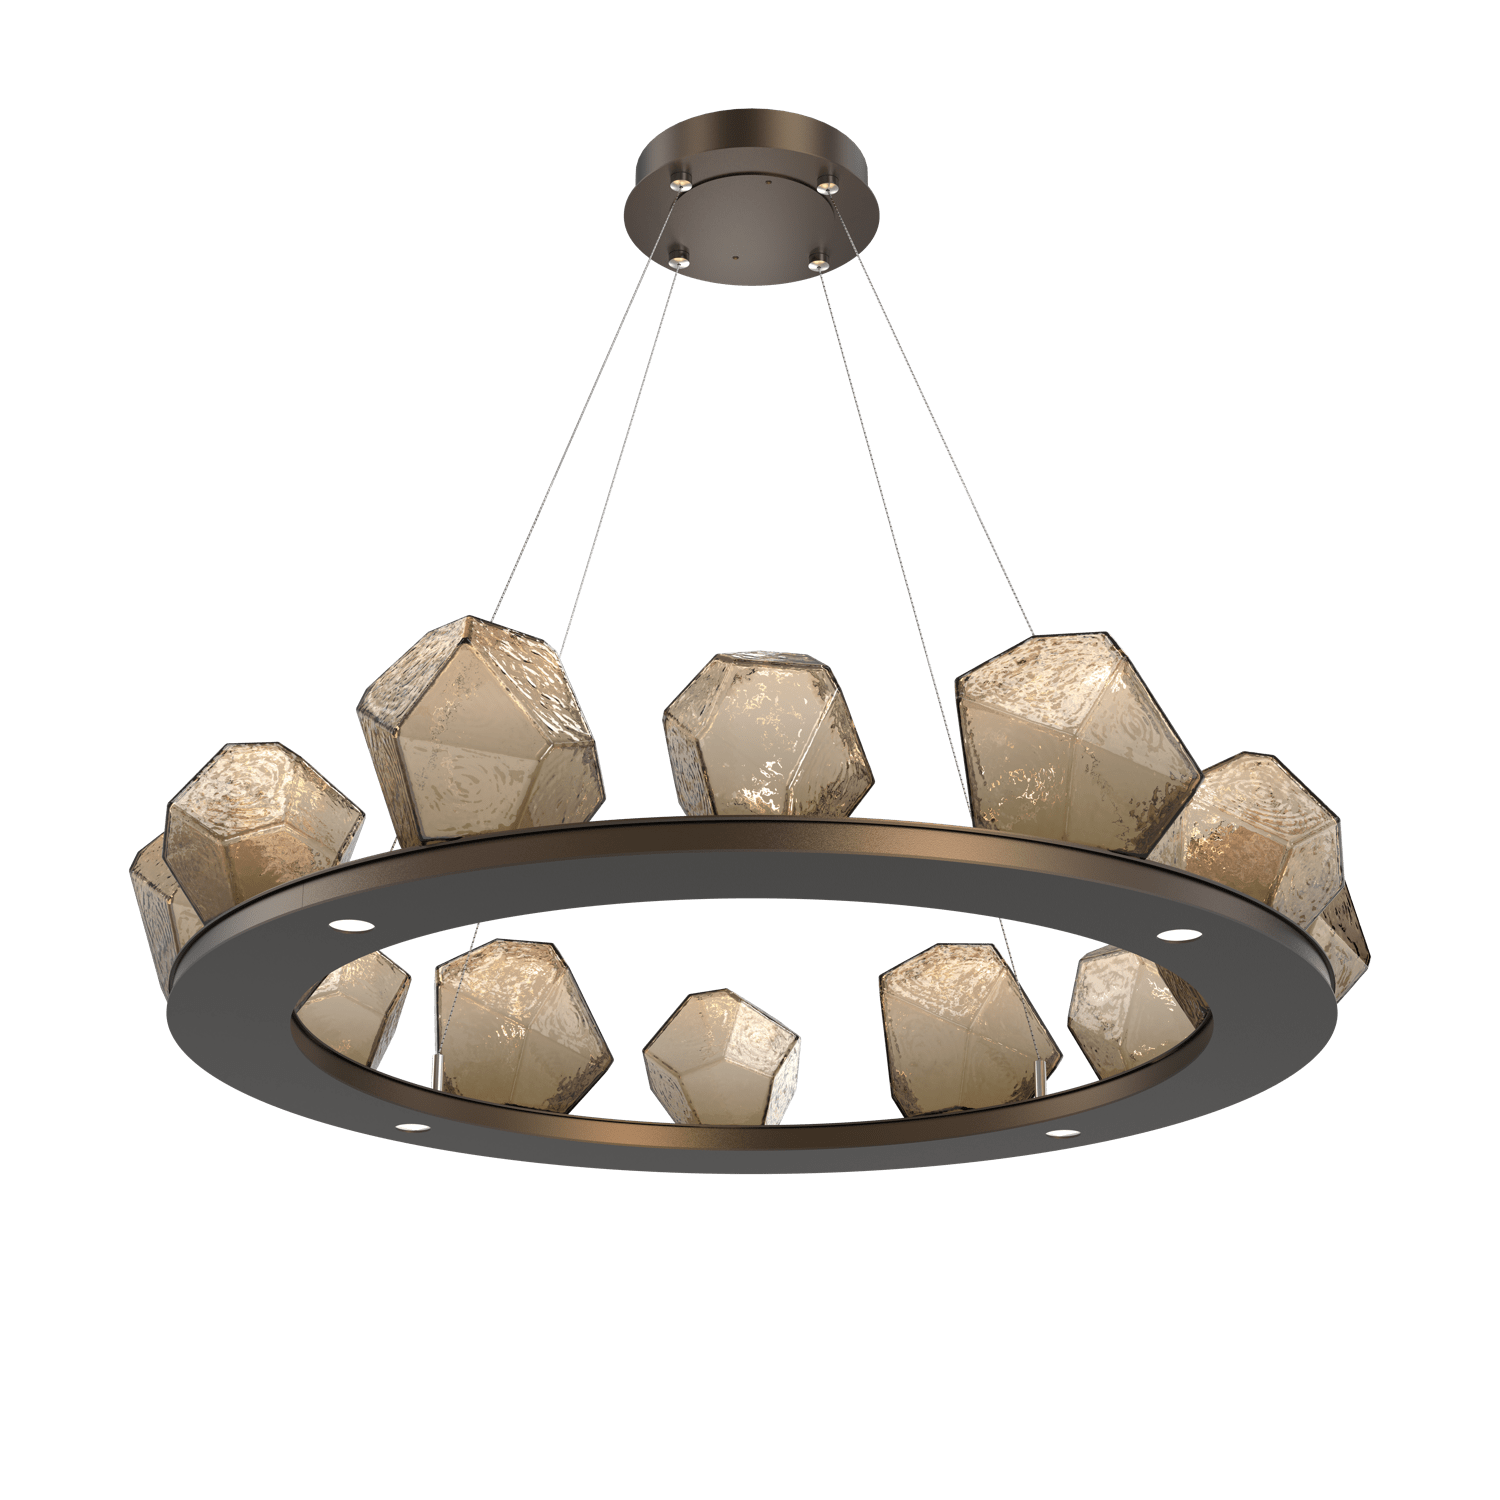 CHB0039-0C-FB-B-Hammerton-Studio-Gem-37-inch-ring-chandelier-with-flat-bronze-finish-and-bronze-blown-glass-shades-and-LED-lamping